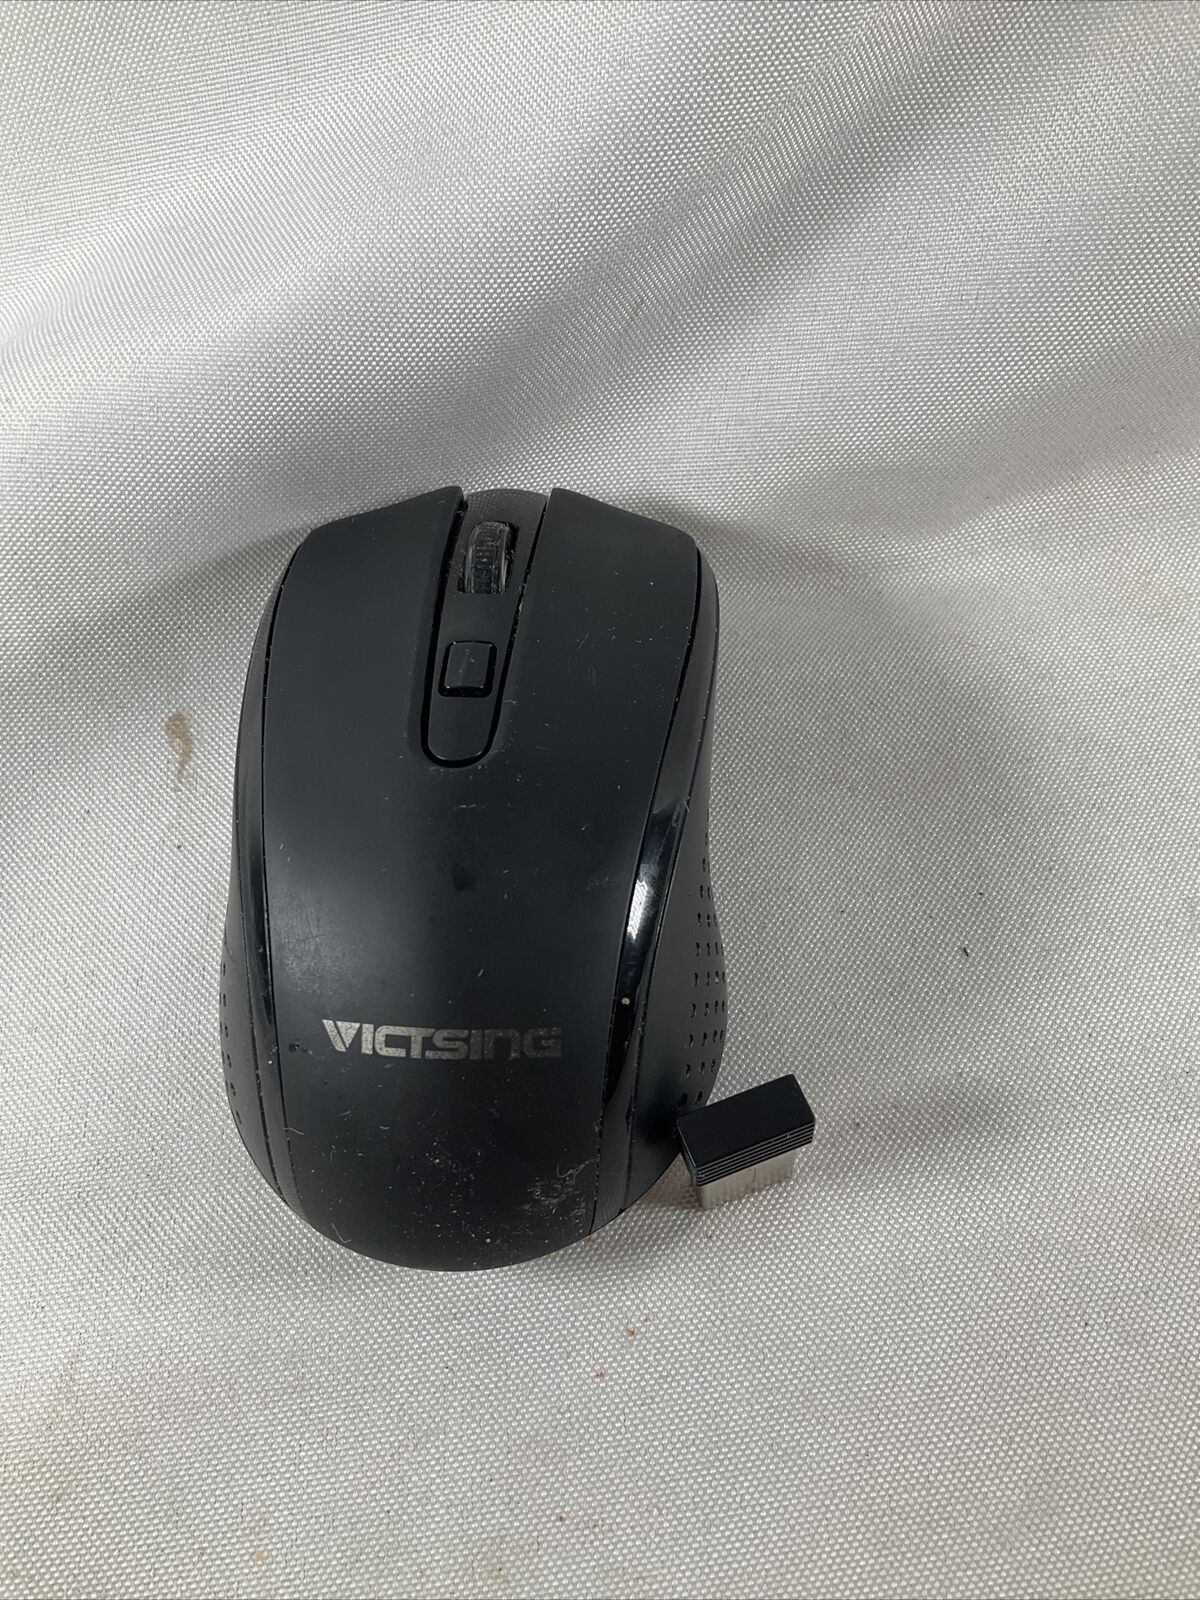 Victsing Wireless Mouse PC132A